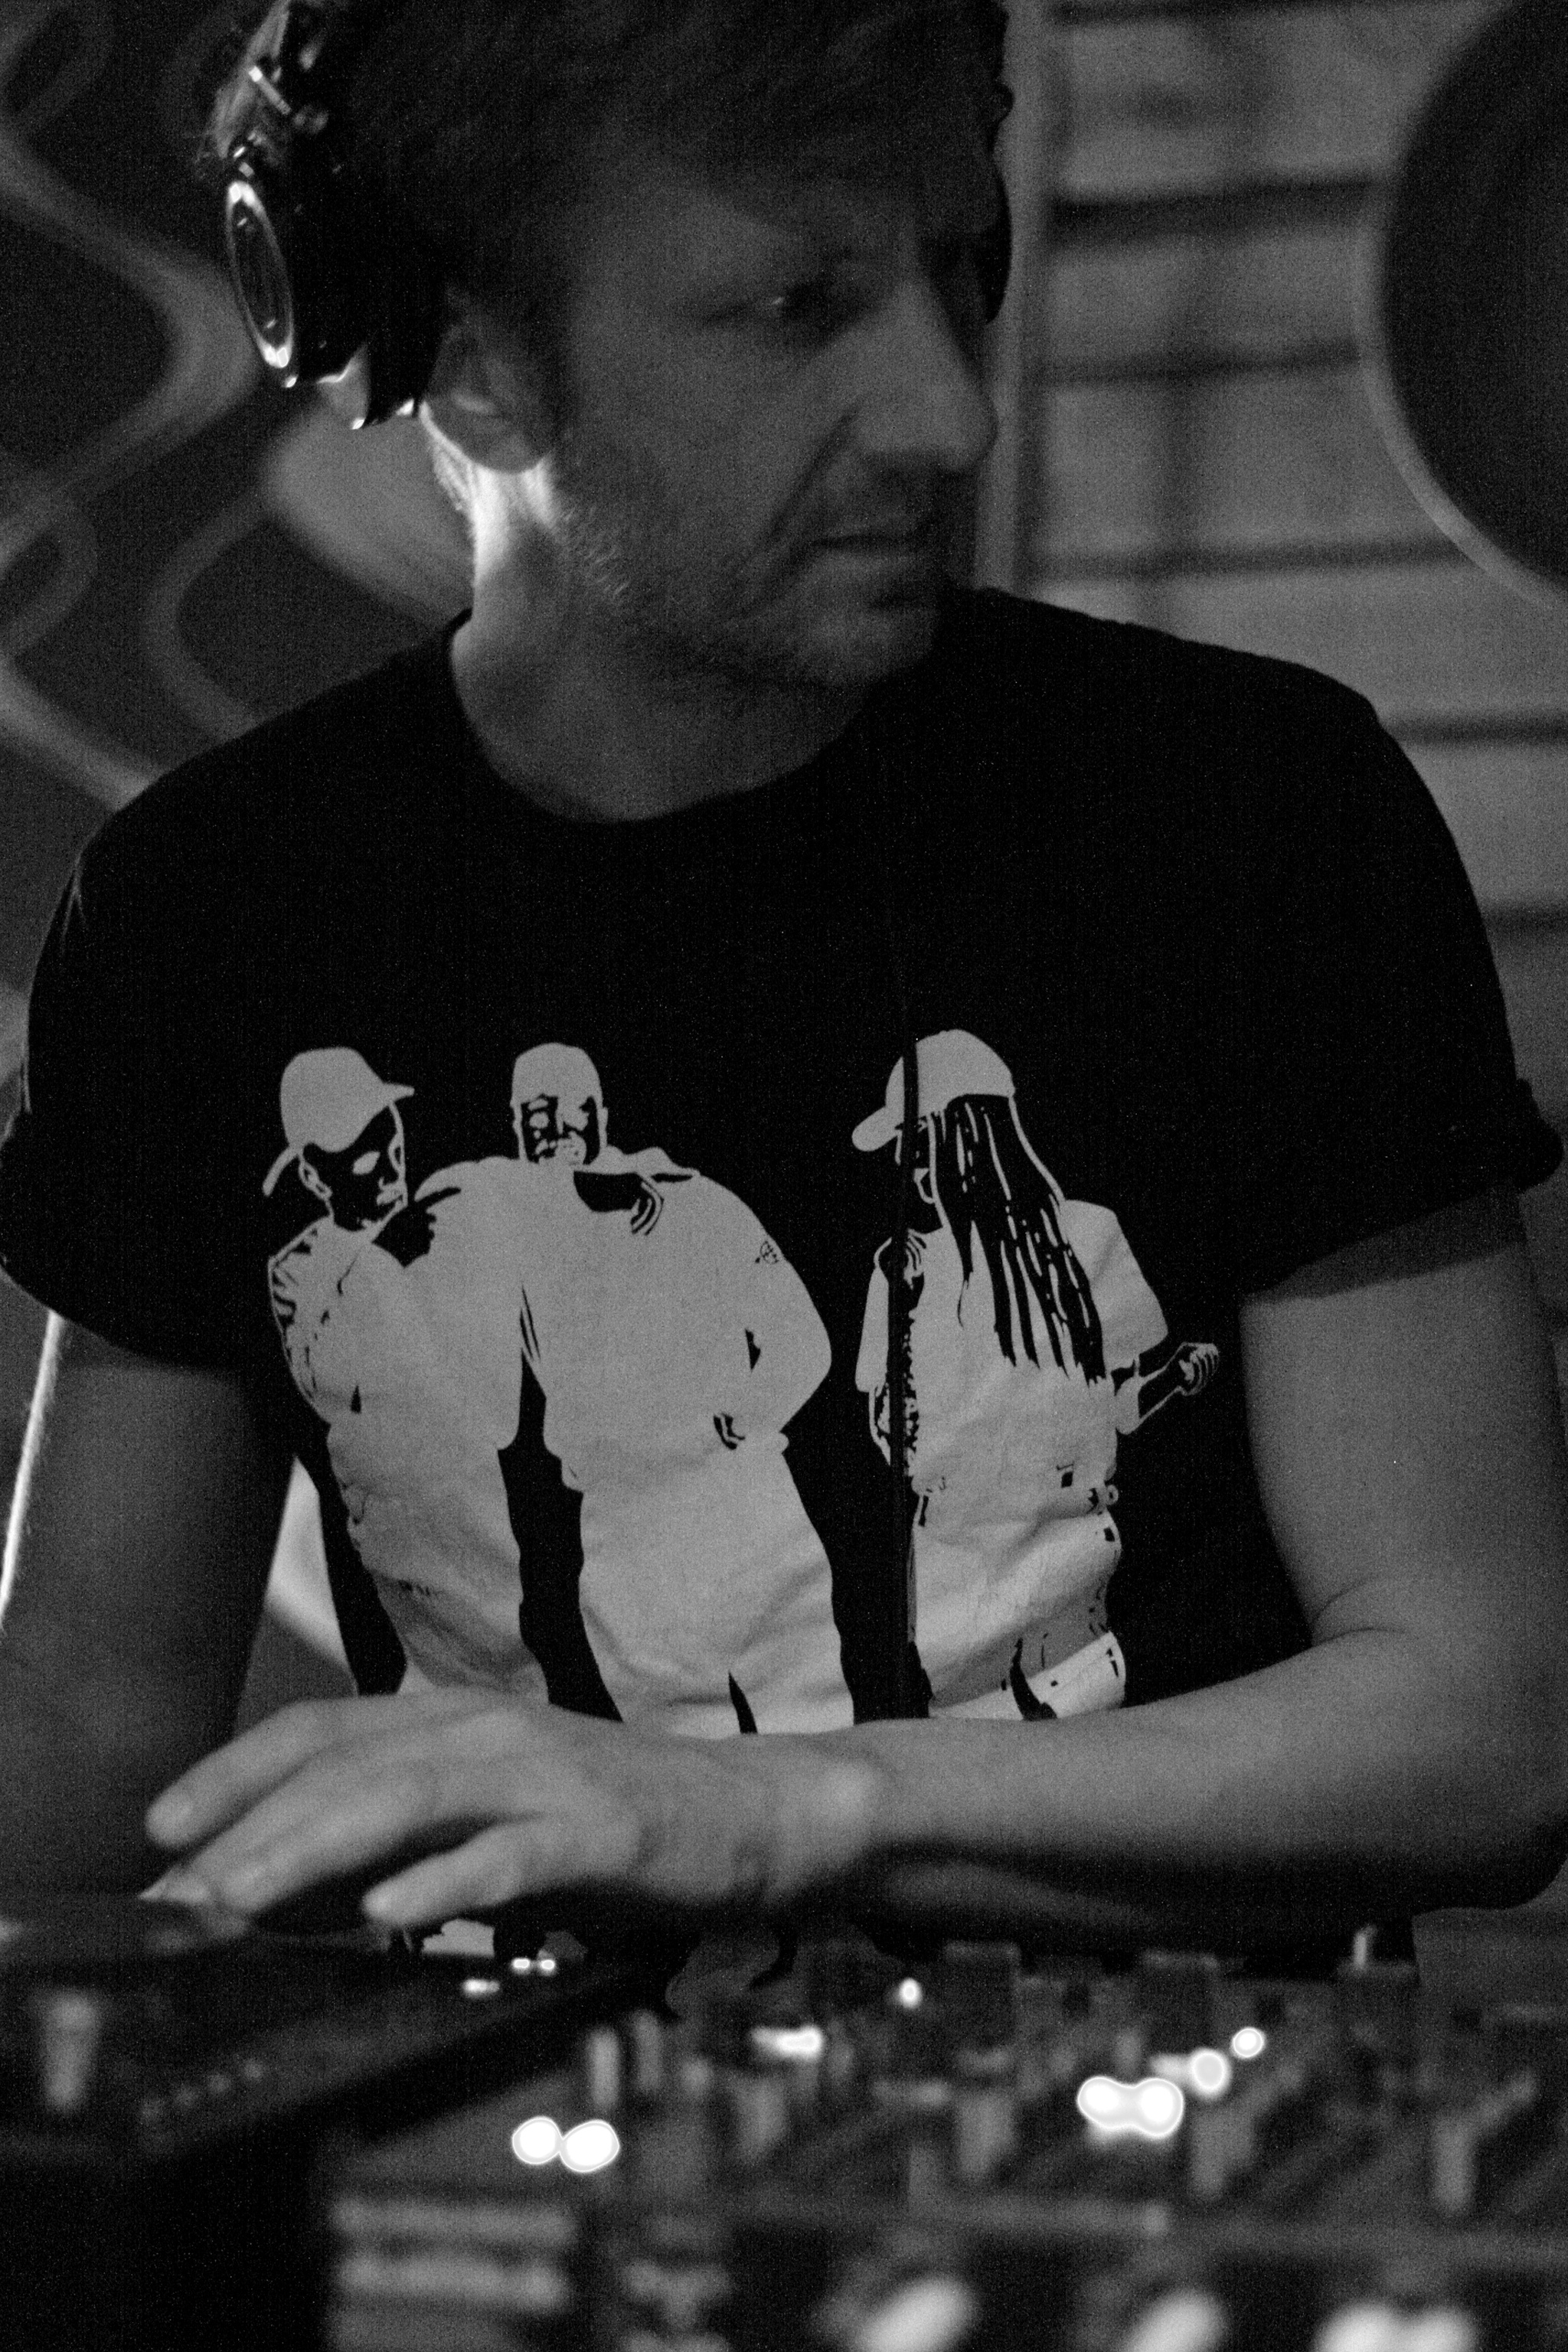 A white man in a black tshirt with a graphic depicting three people dressed all in white looks to his left while working a DJ booth. He wears headphones over his ears. 